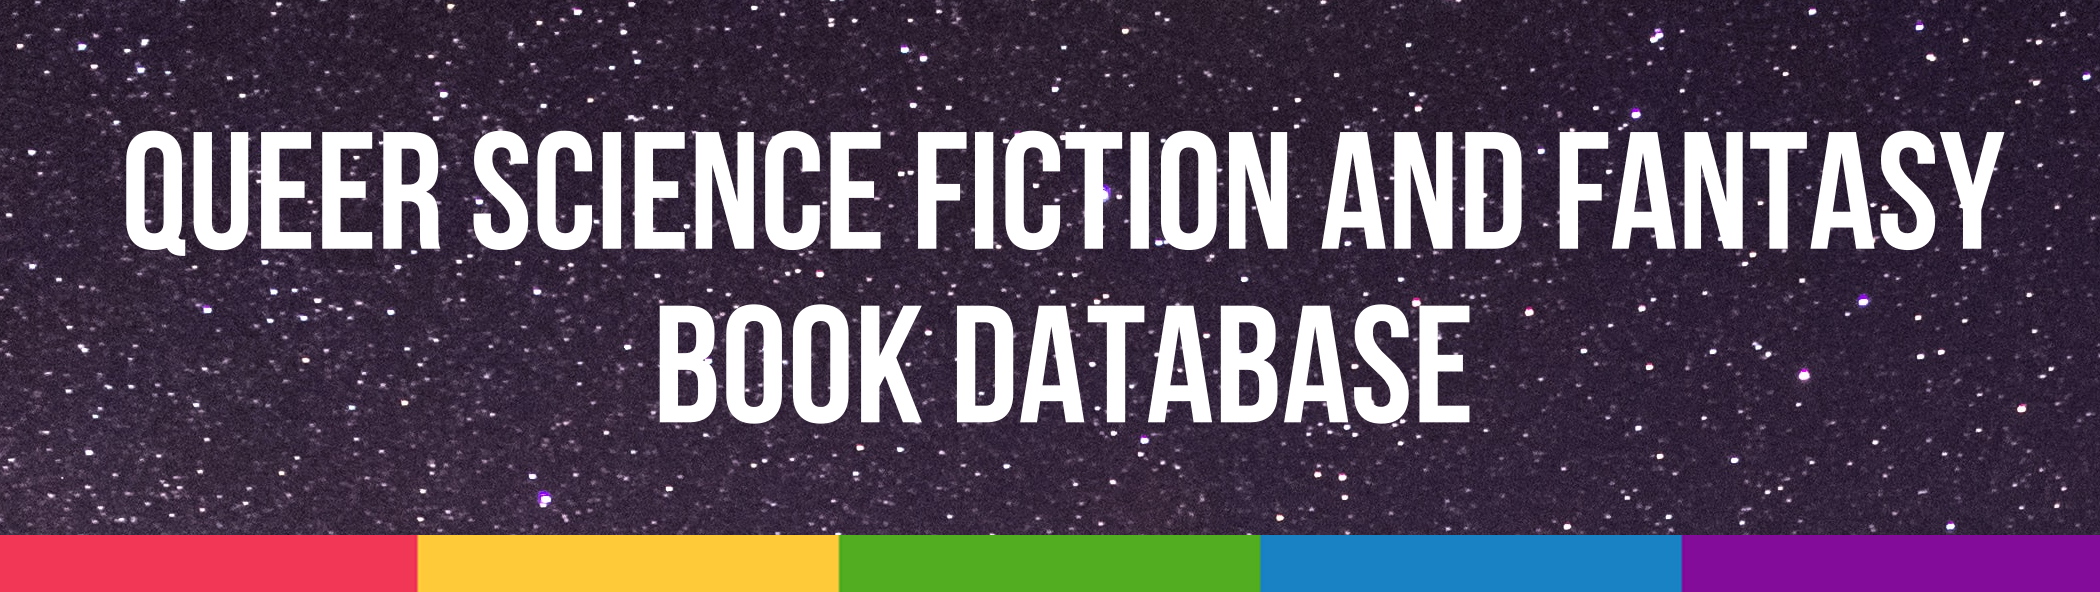 Queer Science Fiction and Fantasy Book Database